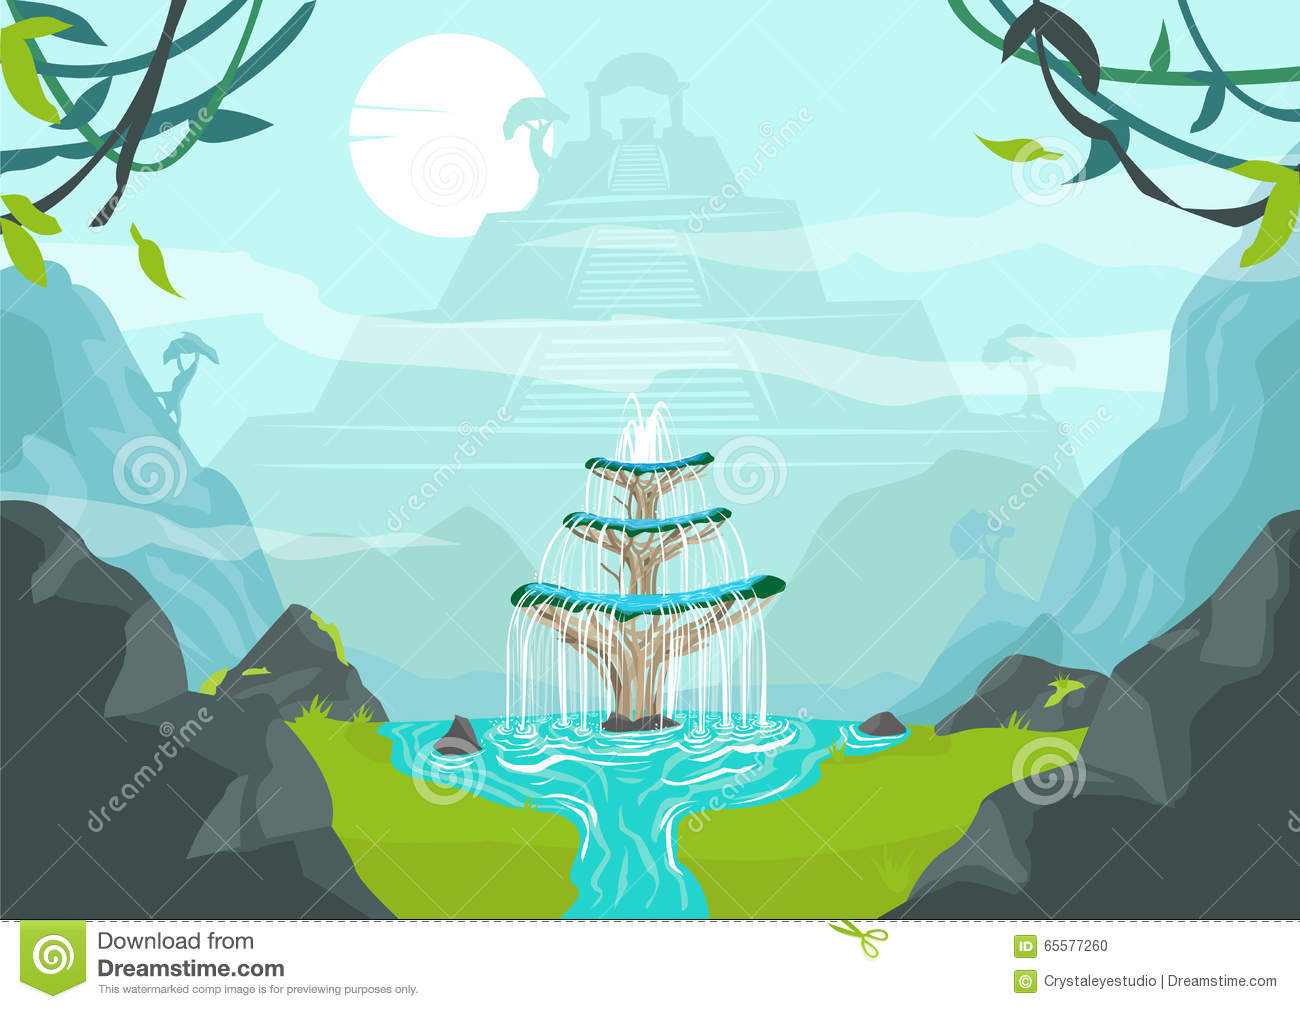 A Lost City With Fountain Of Youth Or Elixir Of Life Concept.